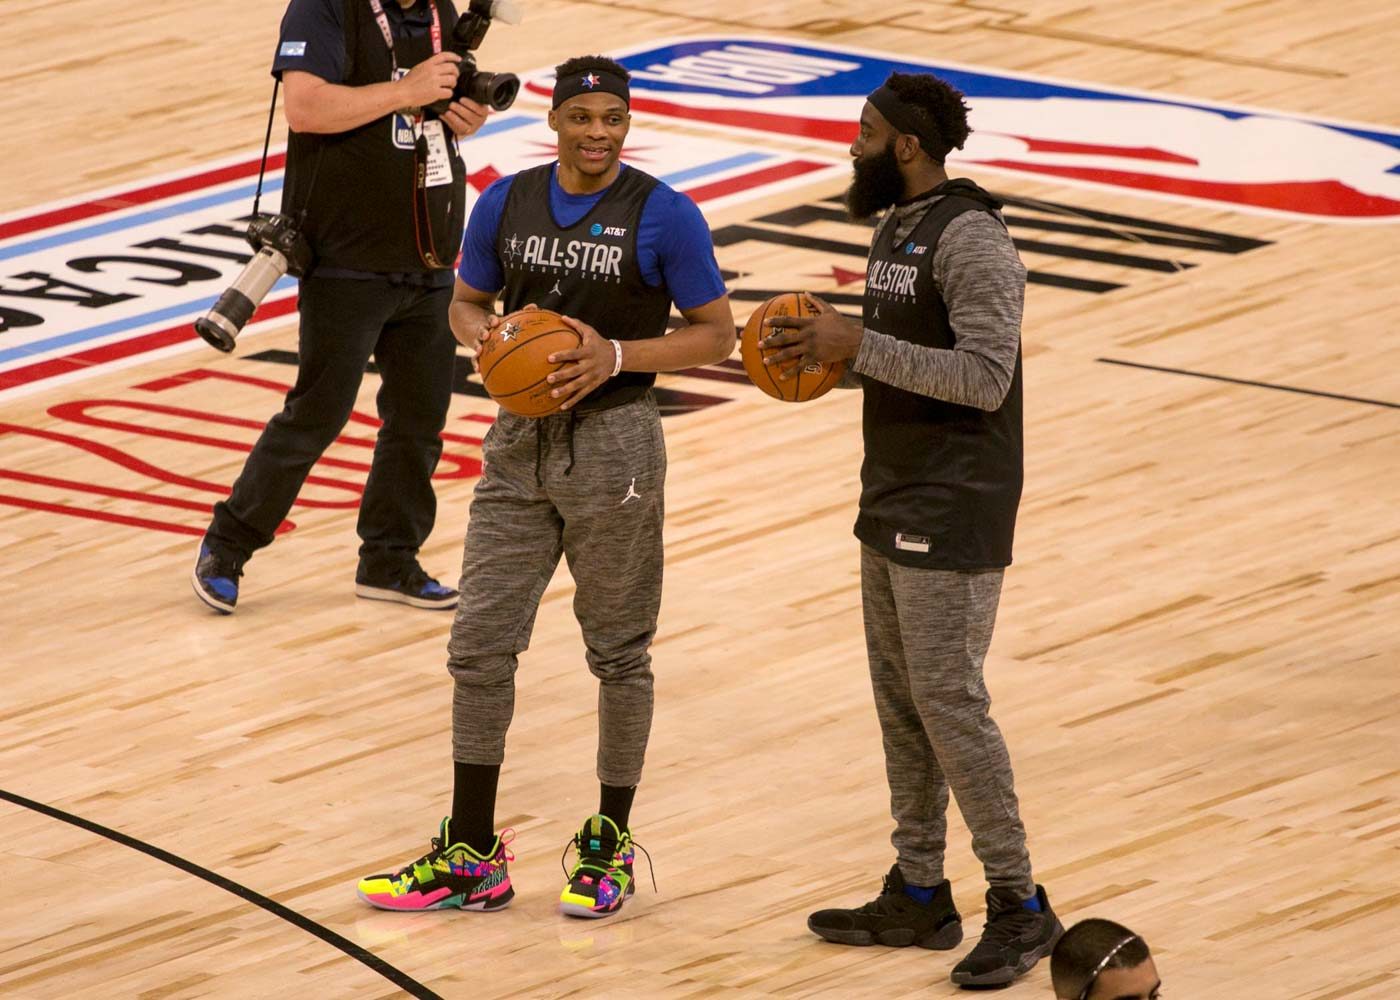 STILL TOGETHER. After facing off on opposing teams last year, Russell Westbrook and James Harden are now teammates with the Houston Rockets and again with Team LeBron. Photo by Paul Mata/Rappler 